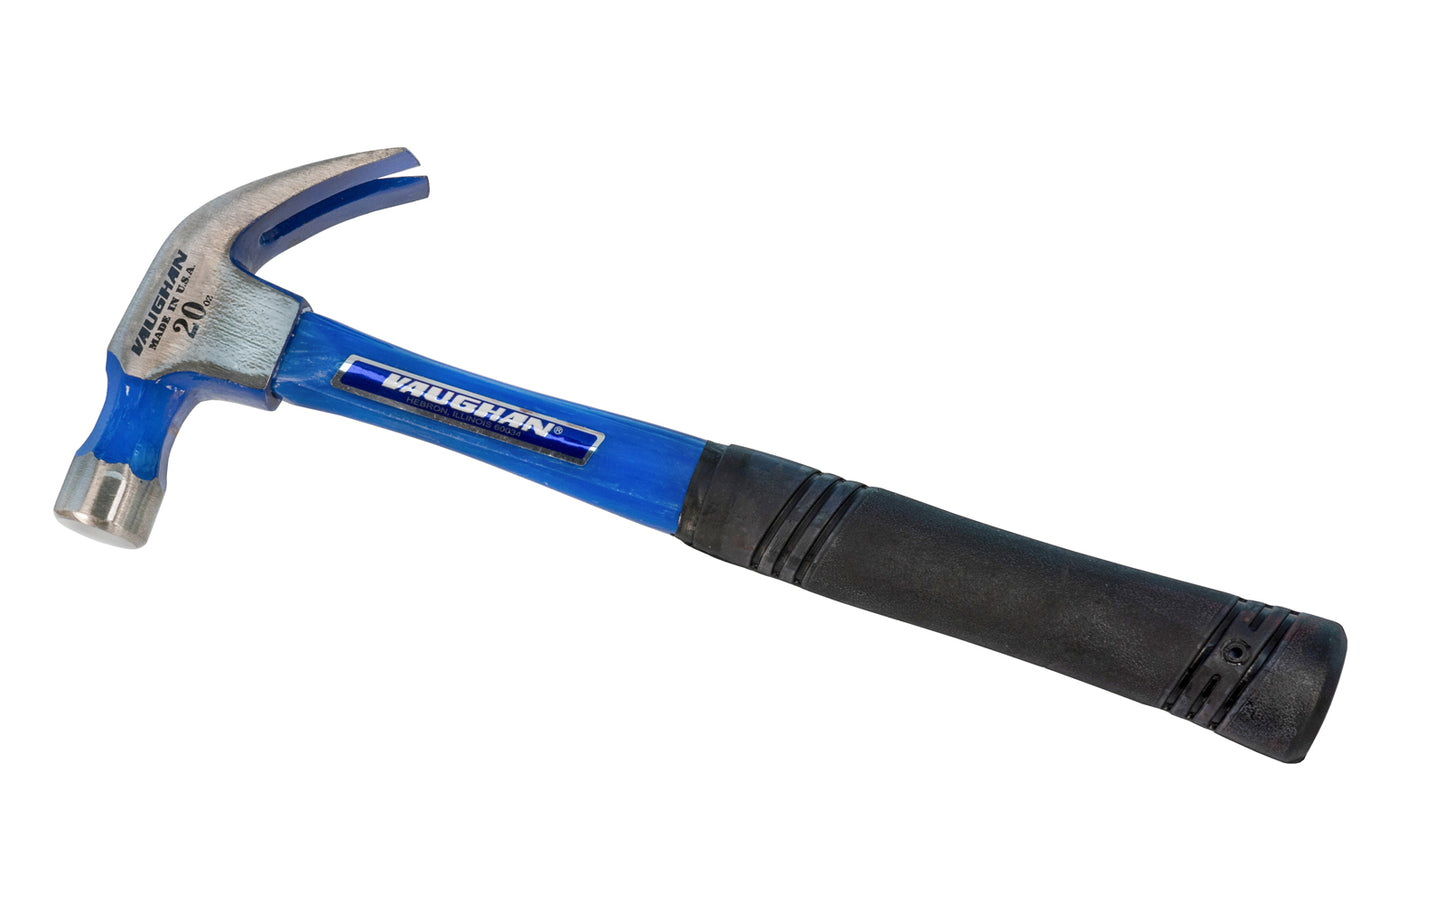 This 20 oz Vaughan FS20 smooth face claw hammer has a hollow-core fiberglass handle which provides better balance & more effective shock absorption than typical solid fiberglass handles. Non-slip cushioned PVC grip. Rust-resistant powder coat finish. Smooth face 20 oz head weight. Vaughan Mfg. Made in USA. 051218115055